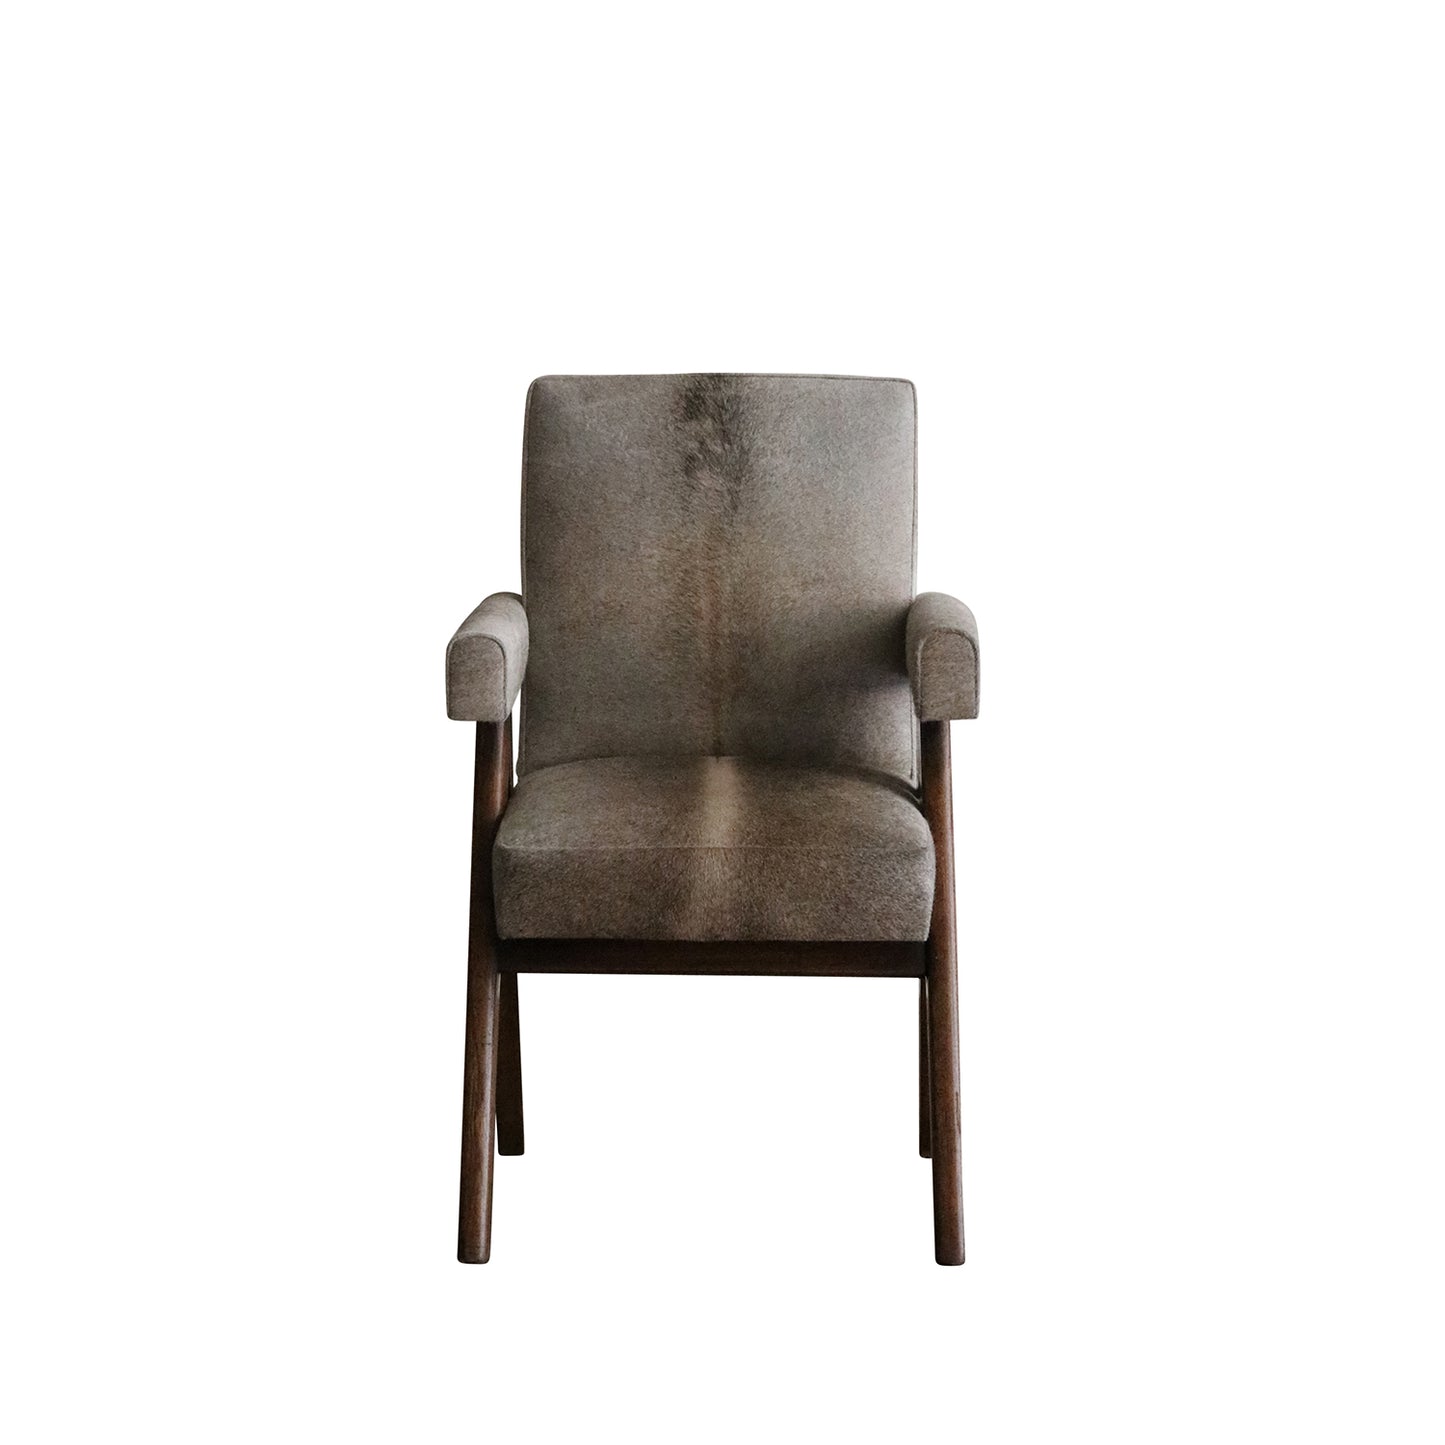 Senate-Committee Arm Chair by Pierre Jeanneret (ca. 1950-1959)